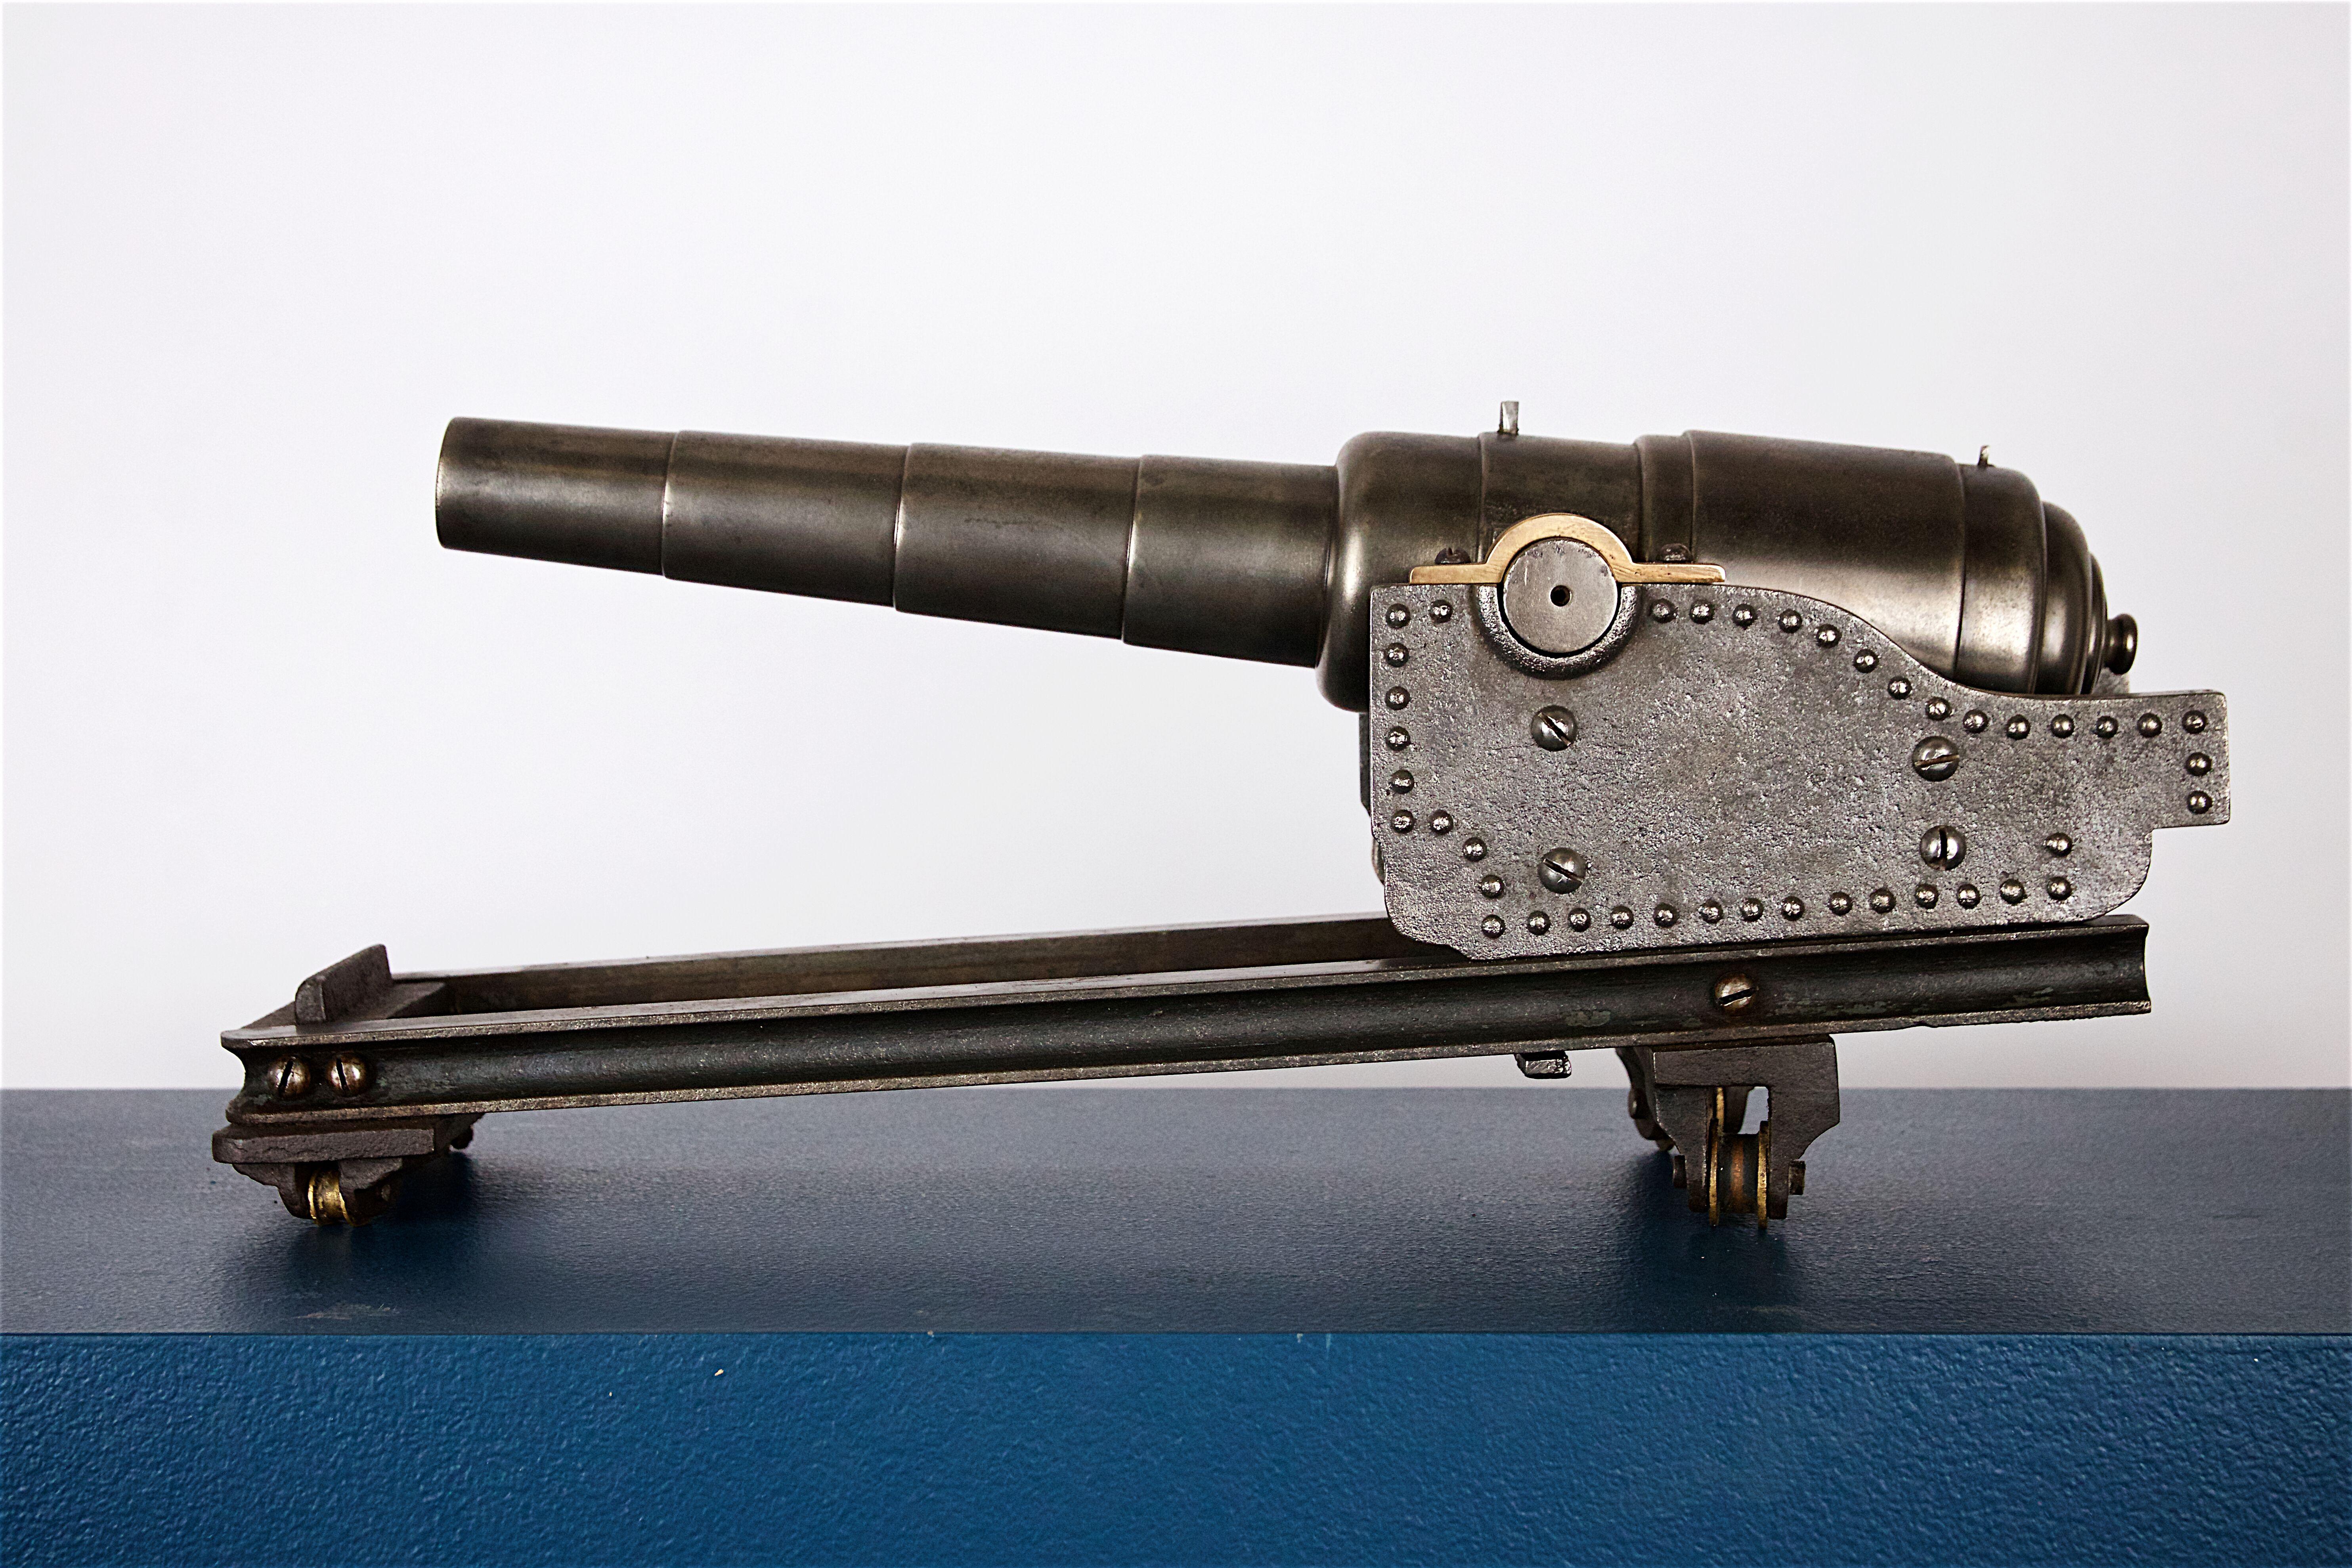 A very good quality steel model of a 64 pound canon on elevating carriage, circa 1860 - English.